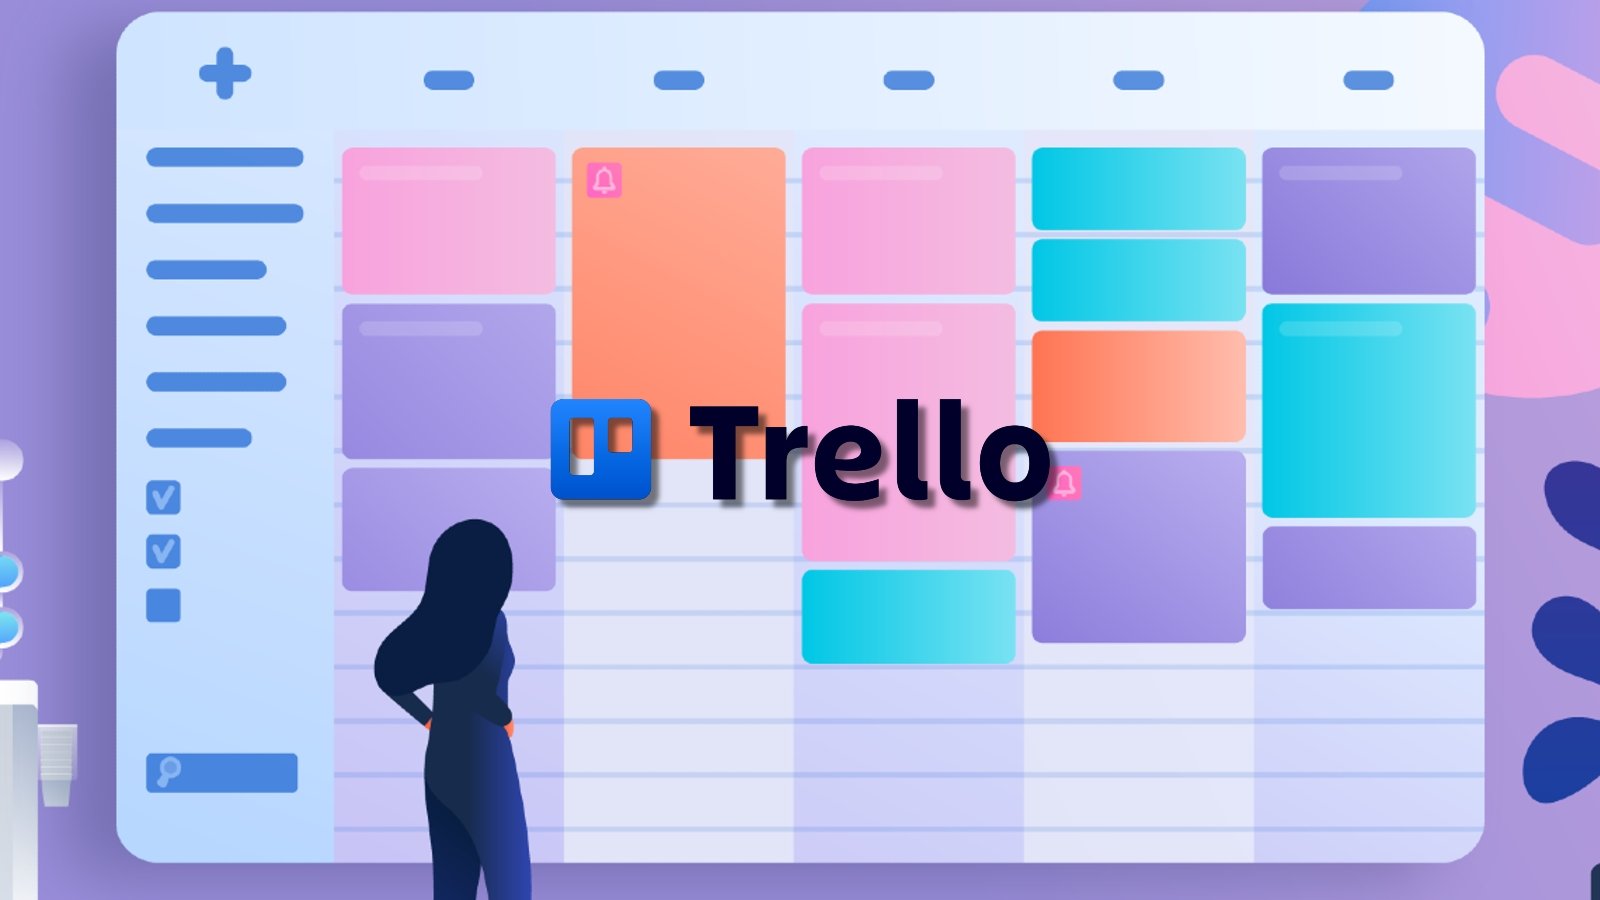 Trello API abused to link email addresses to 15 million accounts